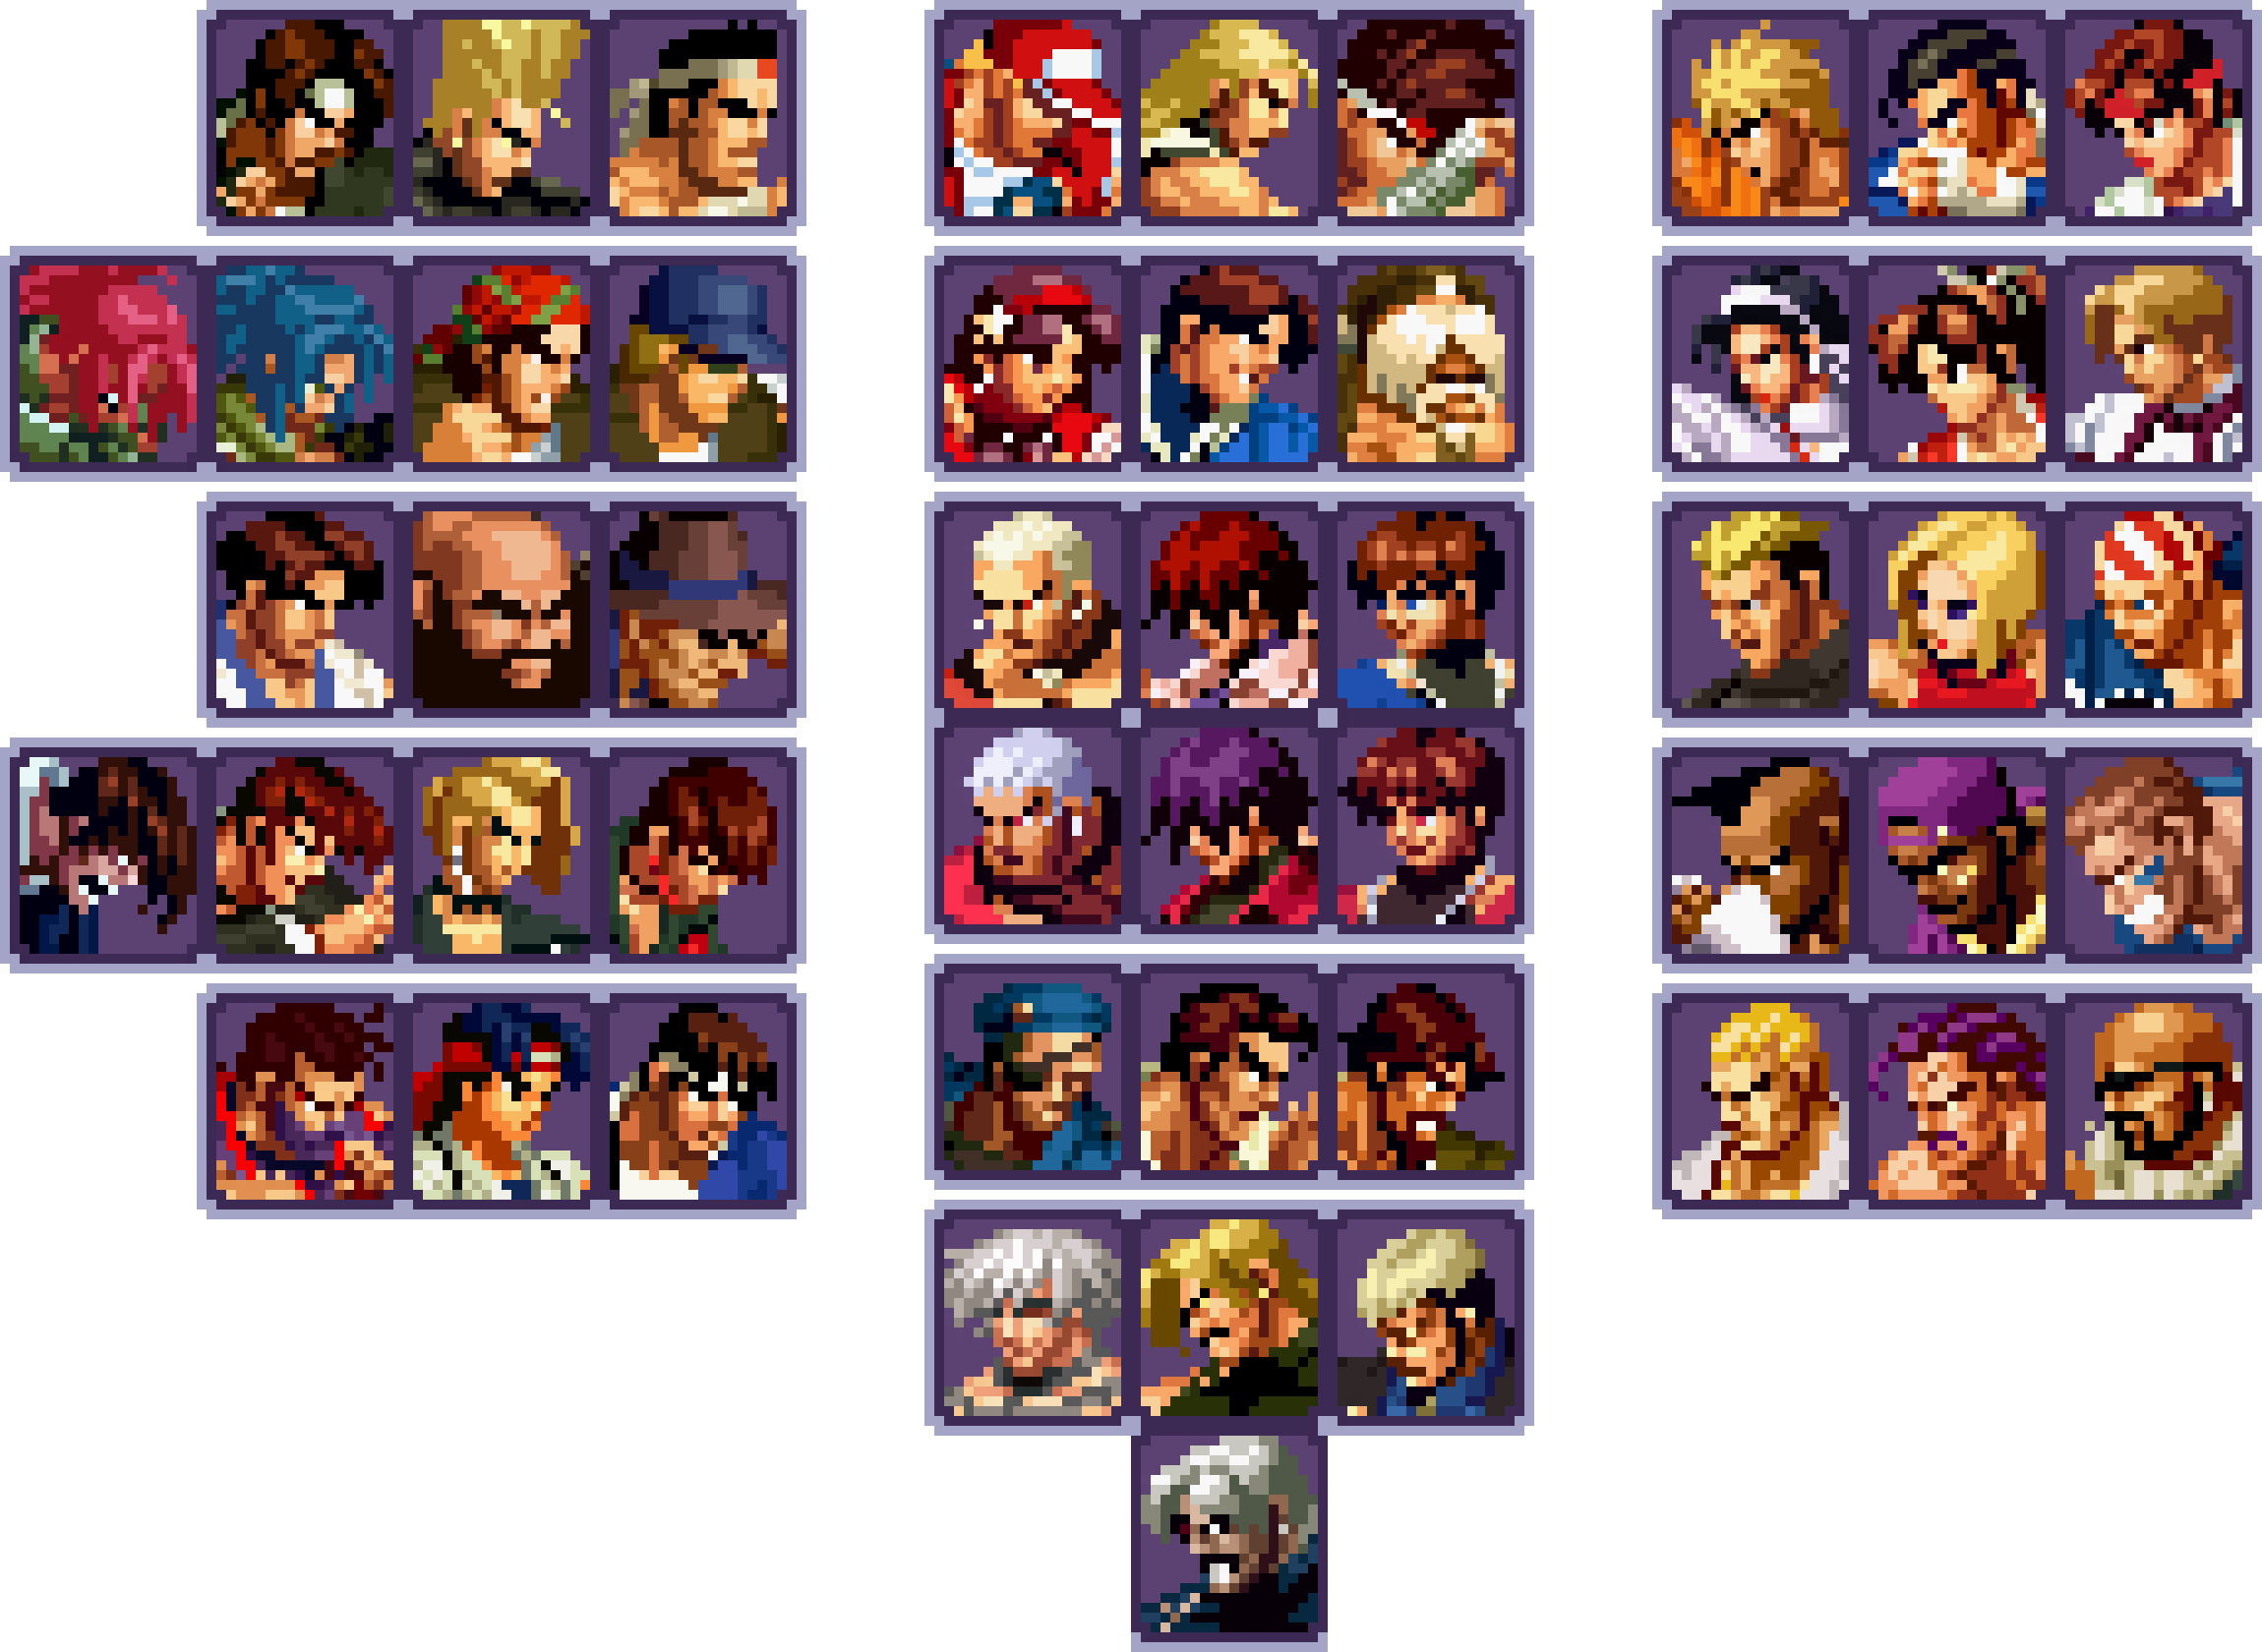 The King of Fighters' 98 Ultimate Match by PatrickAbade on DeviantArt